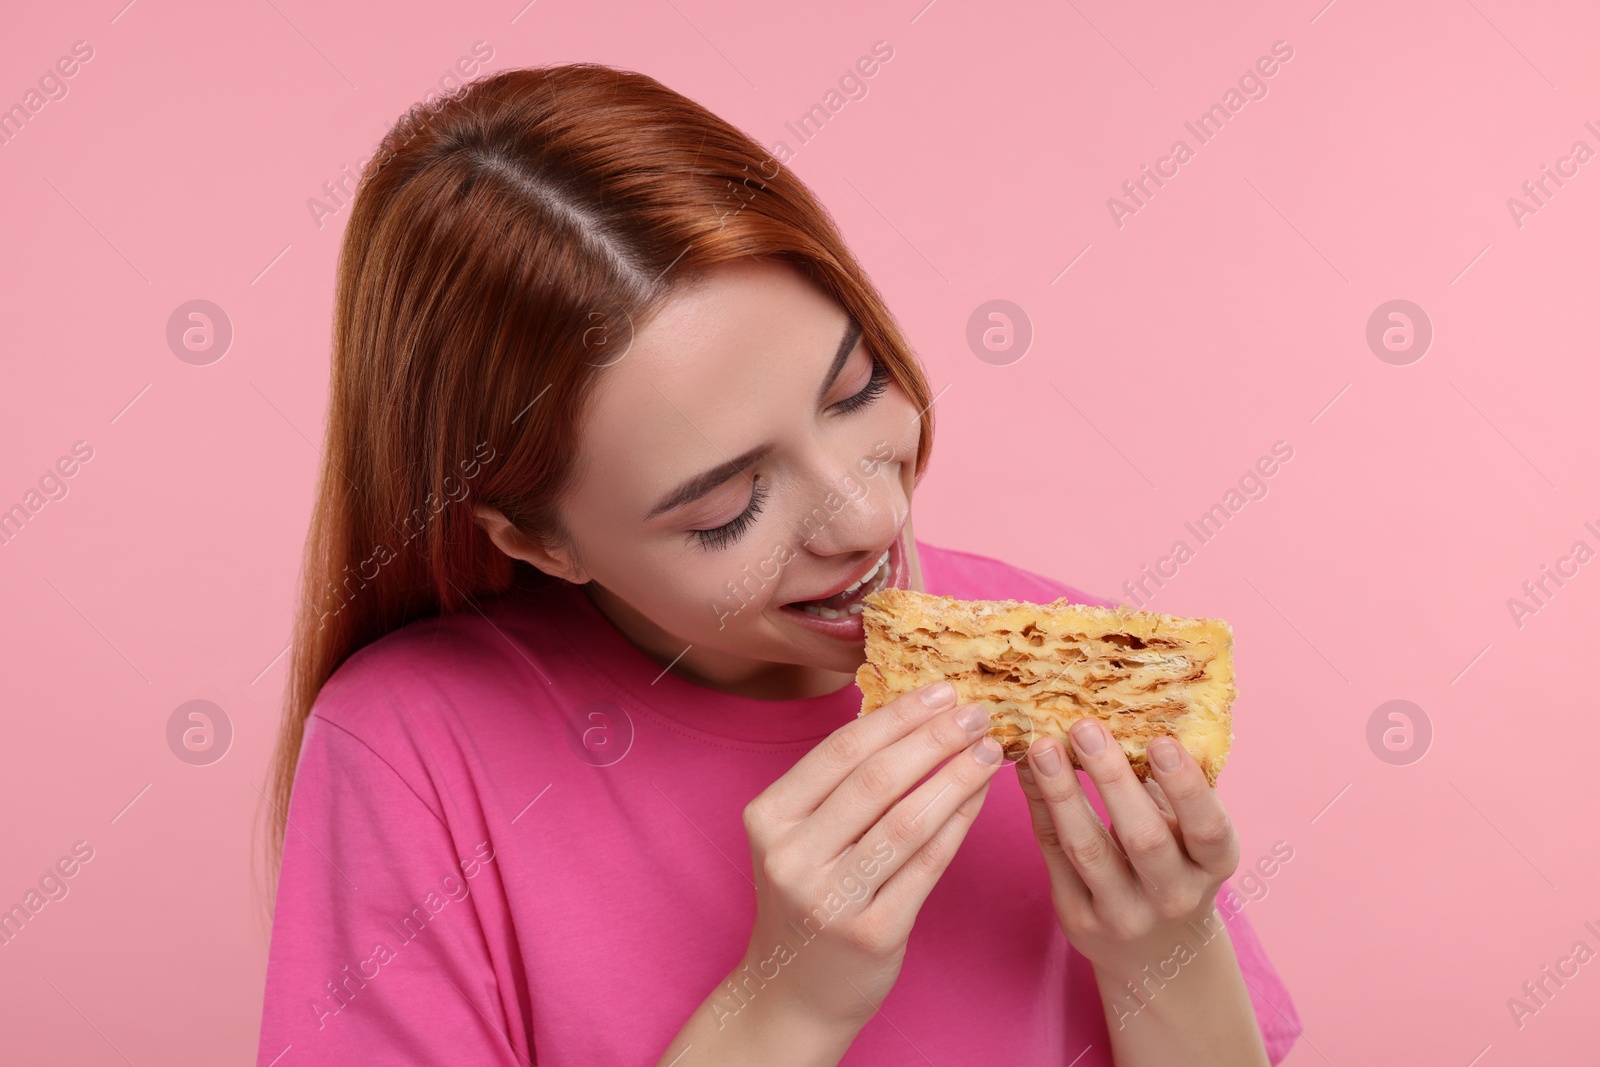 Photo of Young woman eating piece of tasty cake on pink background